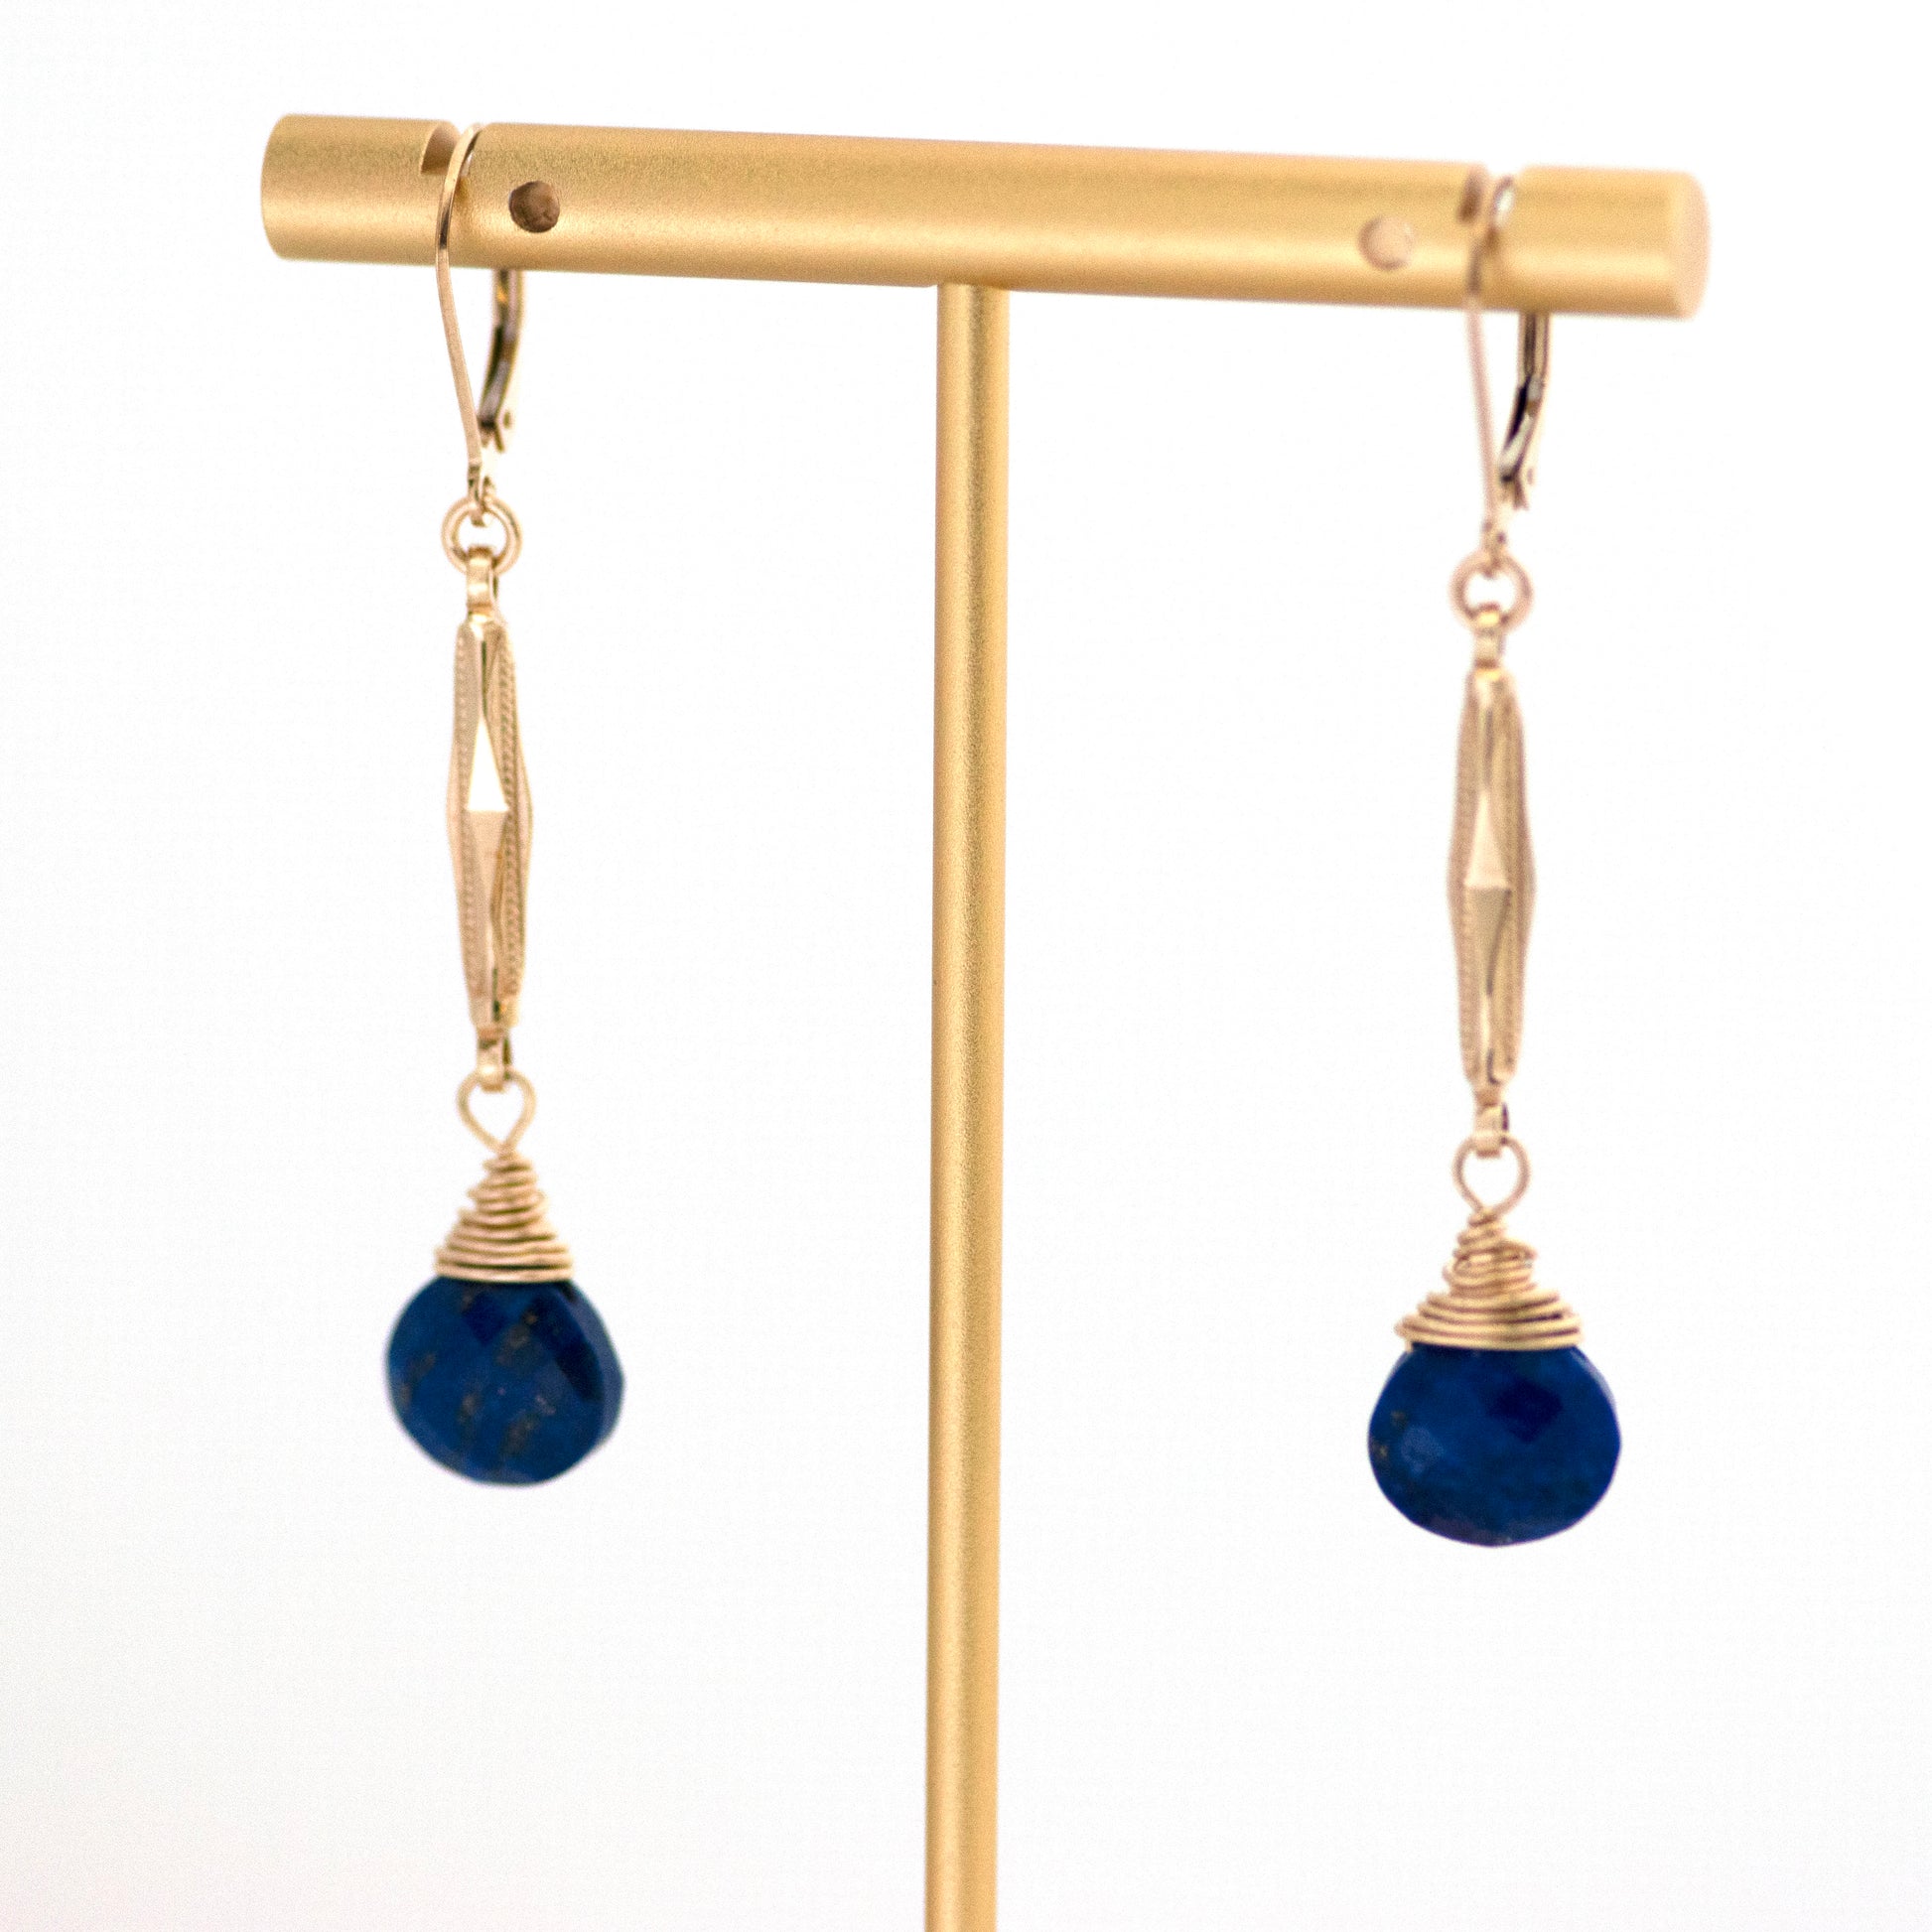 These one-of-a-kind conversion earrings are made up of:  Gold filled antique Edwardian watch chain links from the early 1900s with hand tooled details. Lapis lazuli. Earrings hanging from T bar earring stand.